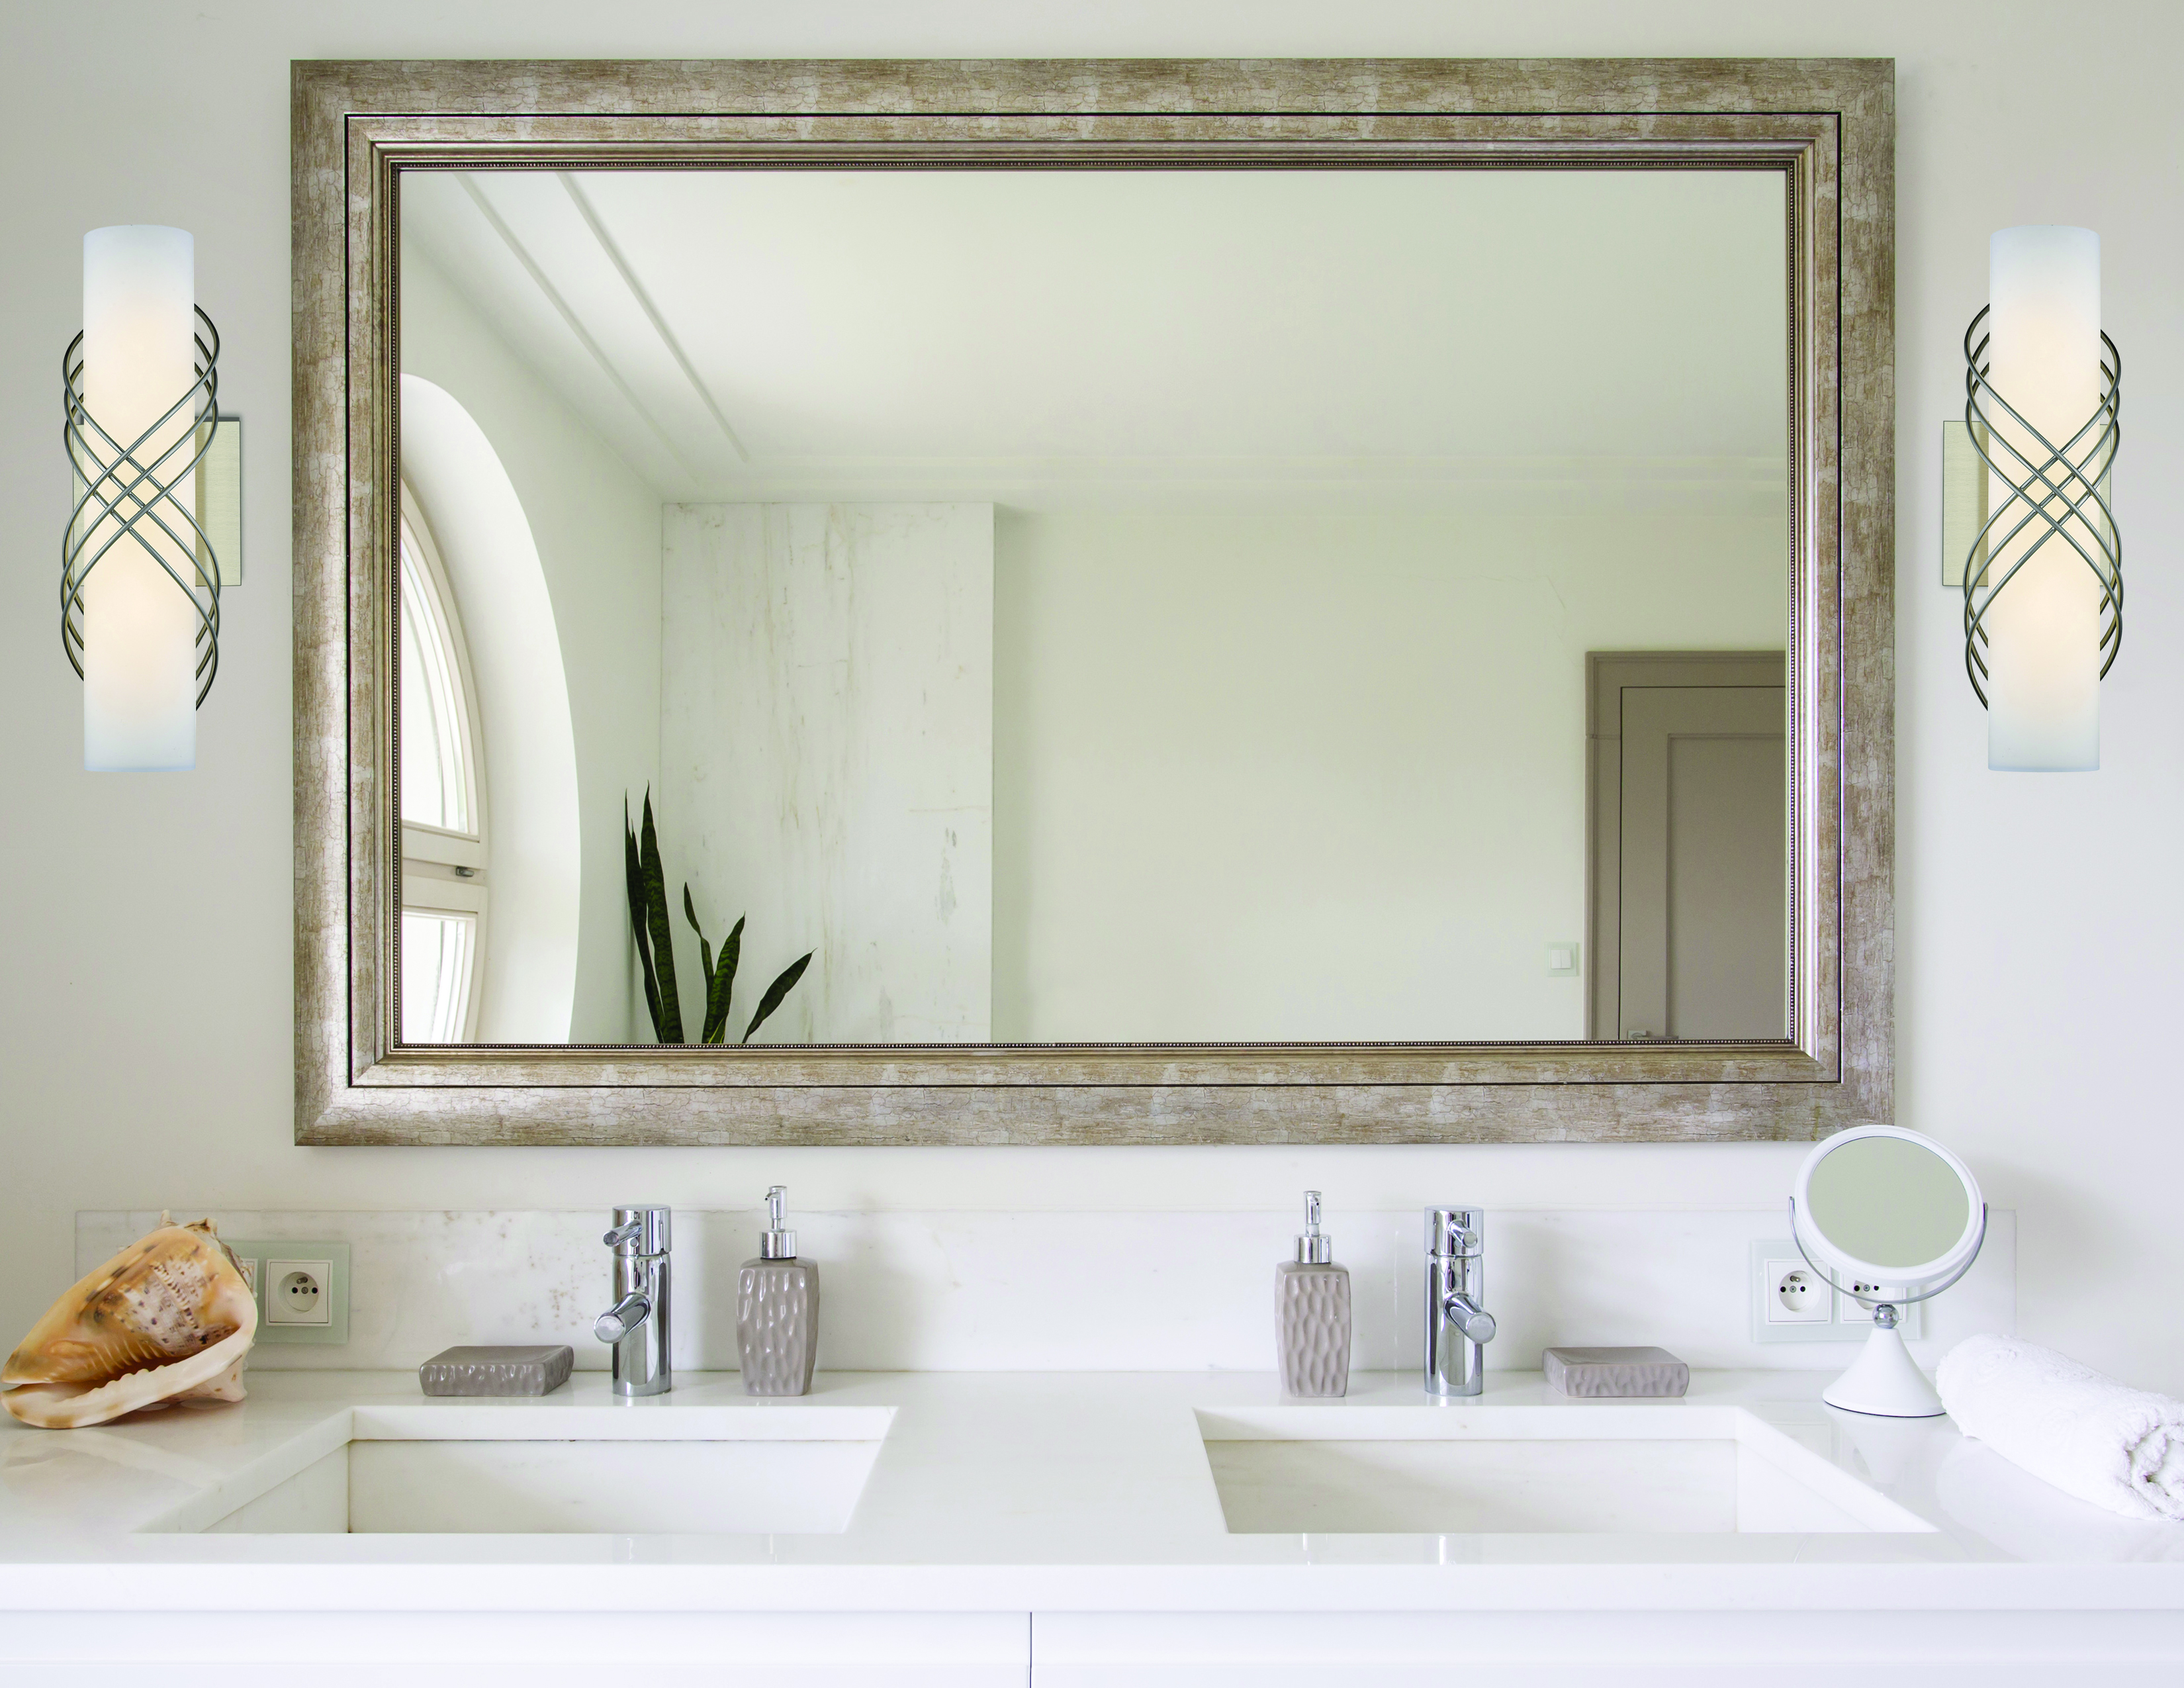 LED Bathroom Lighted Mirrors - The Technical Aspects: What to Look For